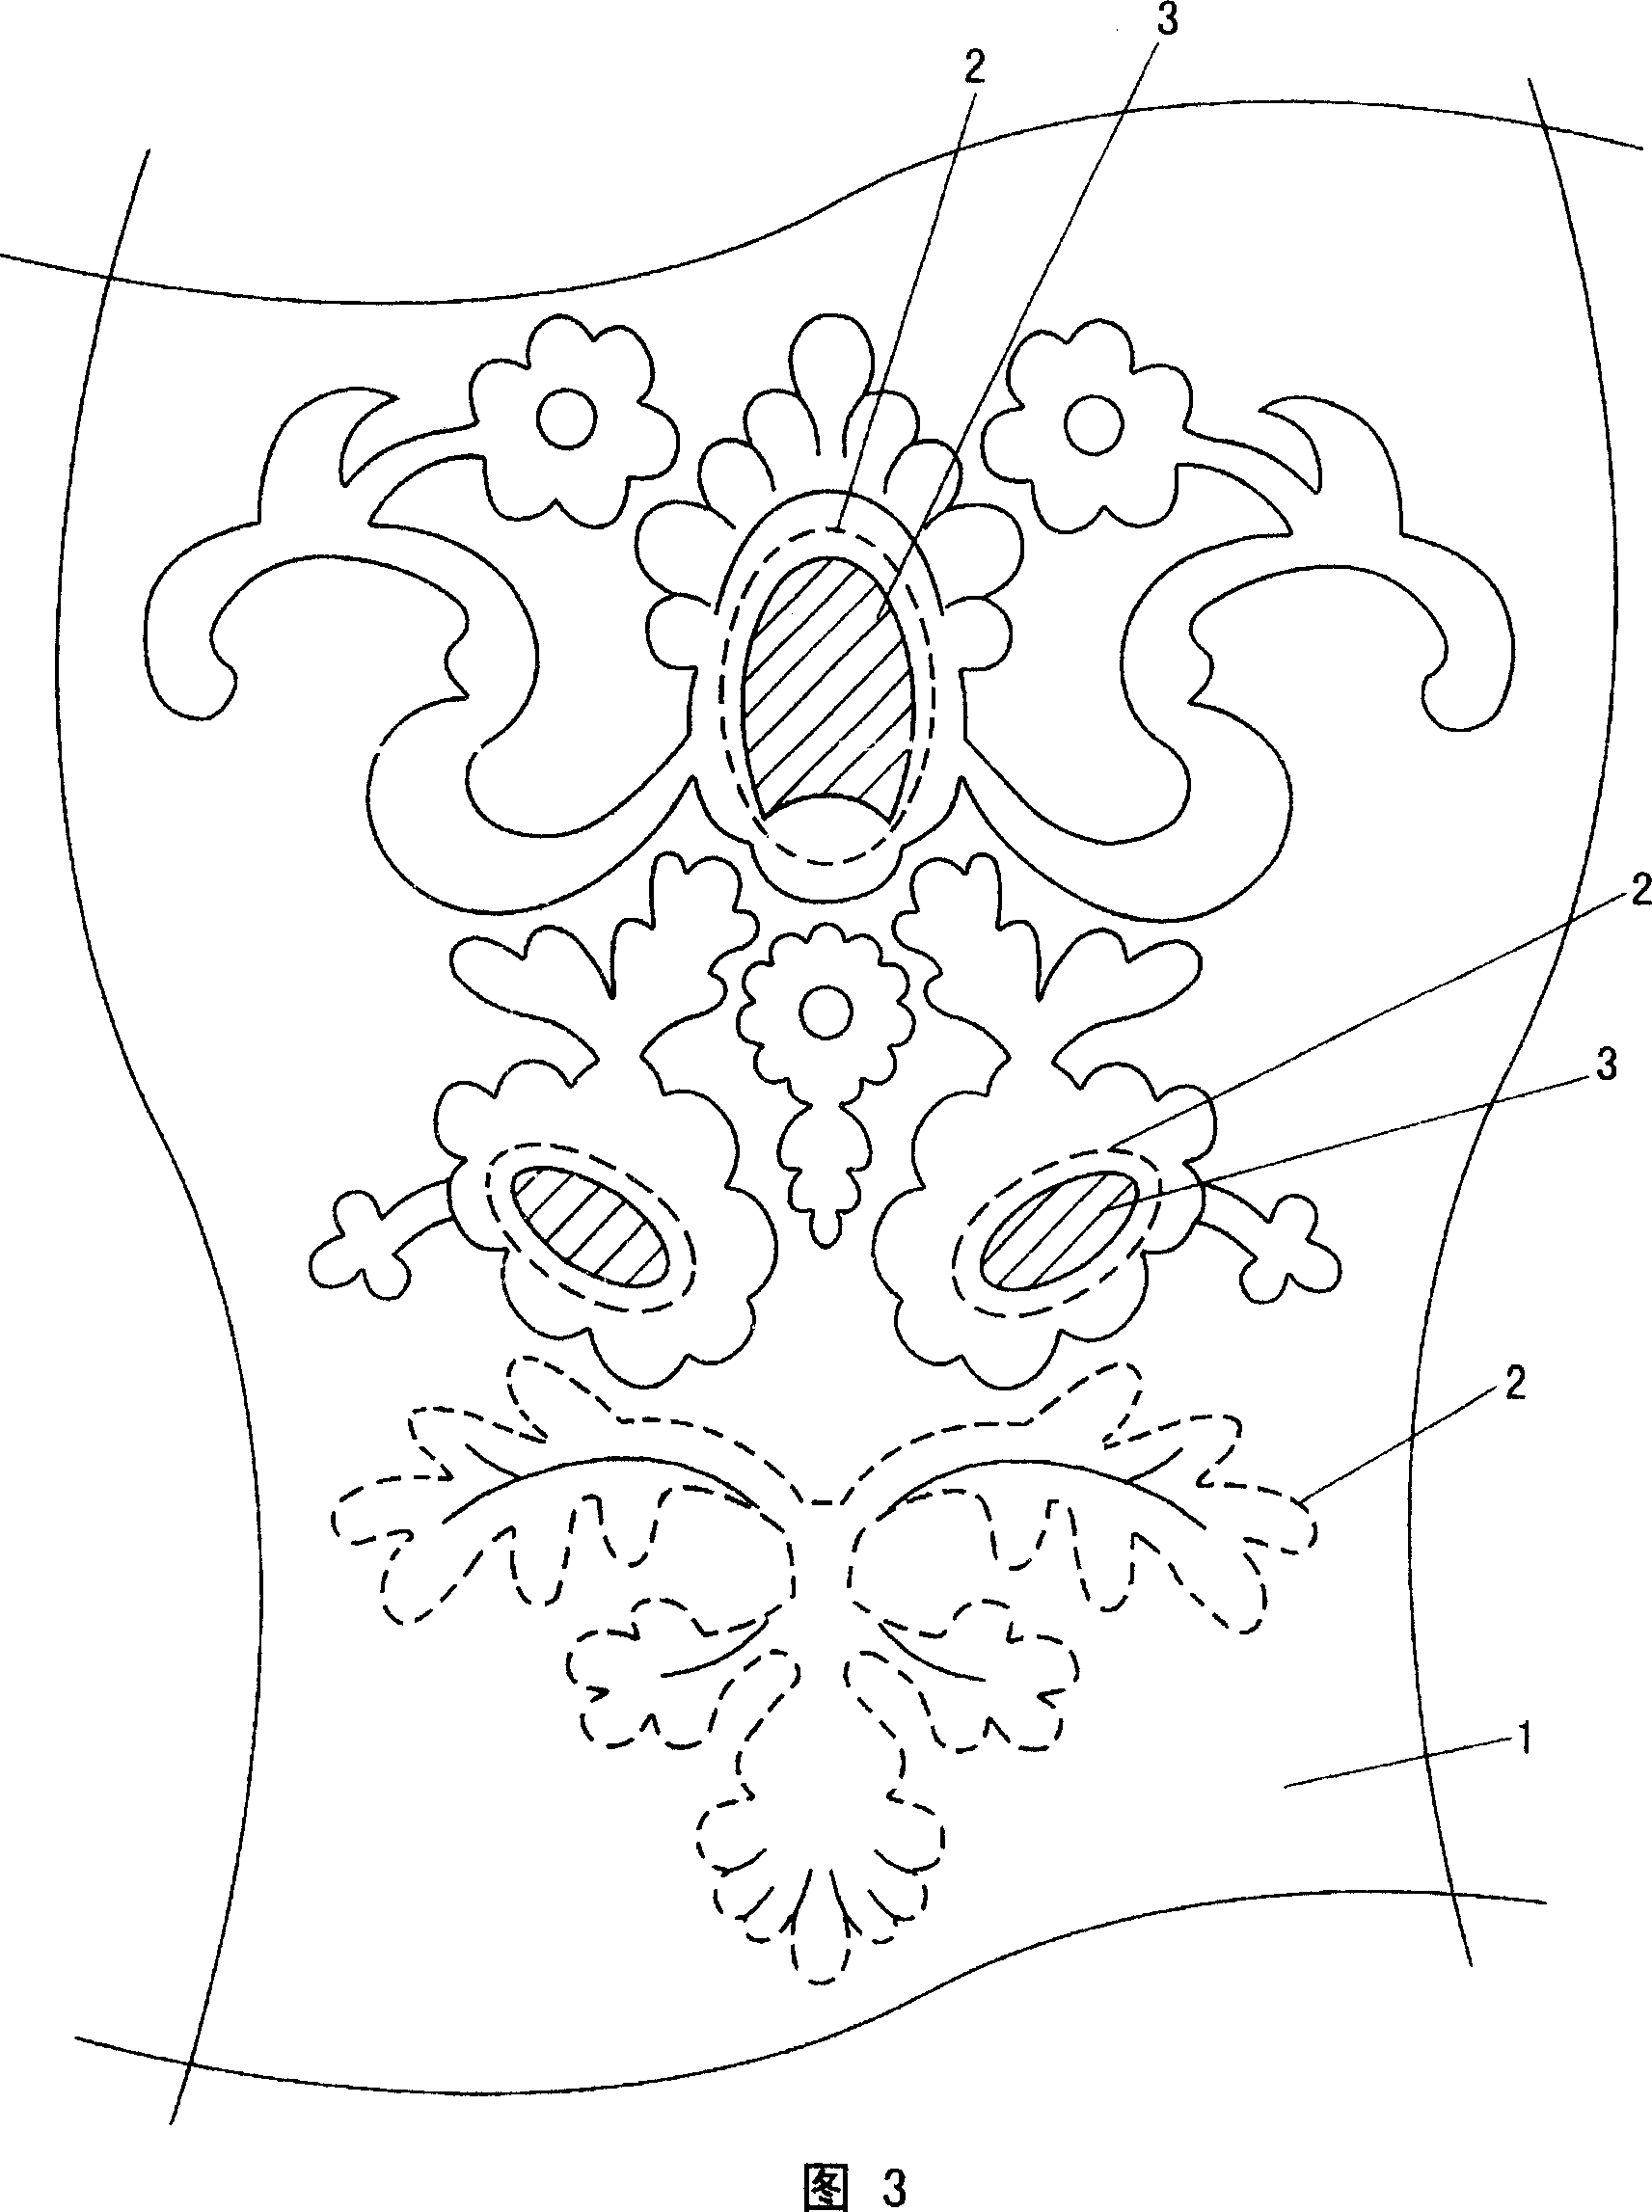 Processing method for carving hollow applique/embroider in textile